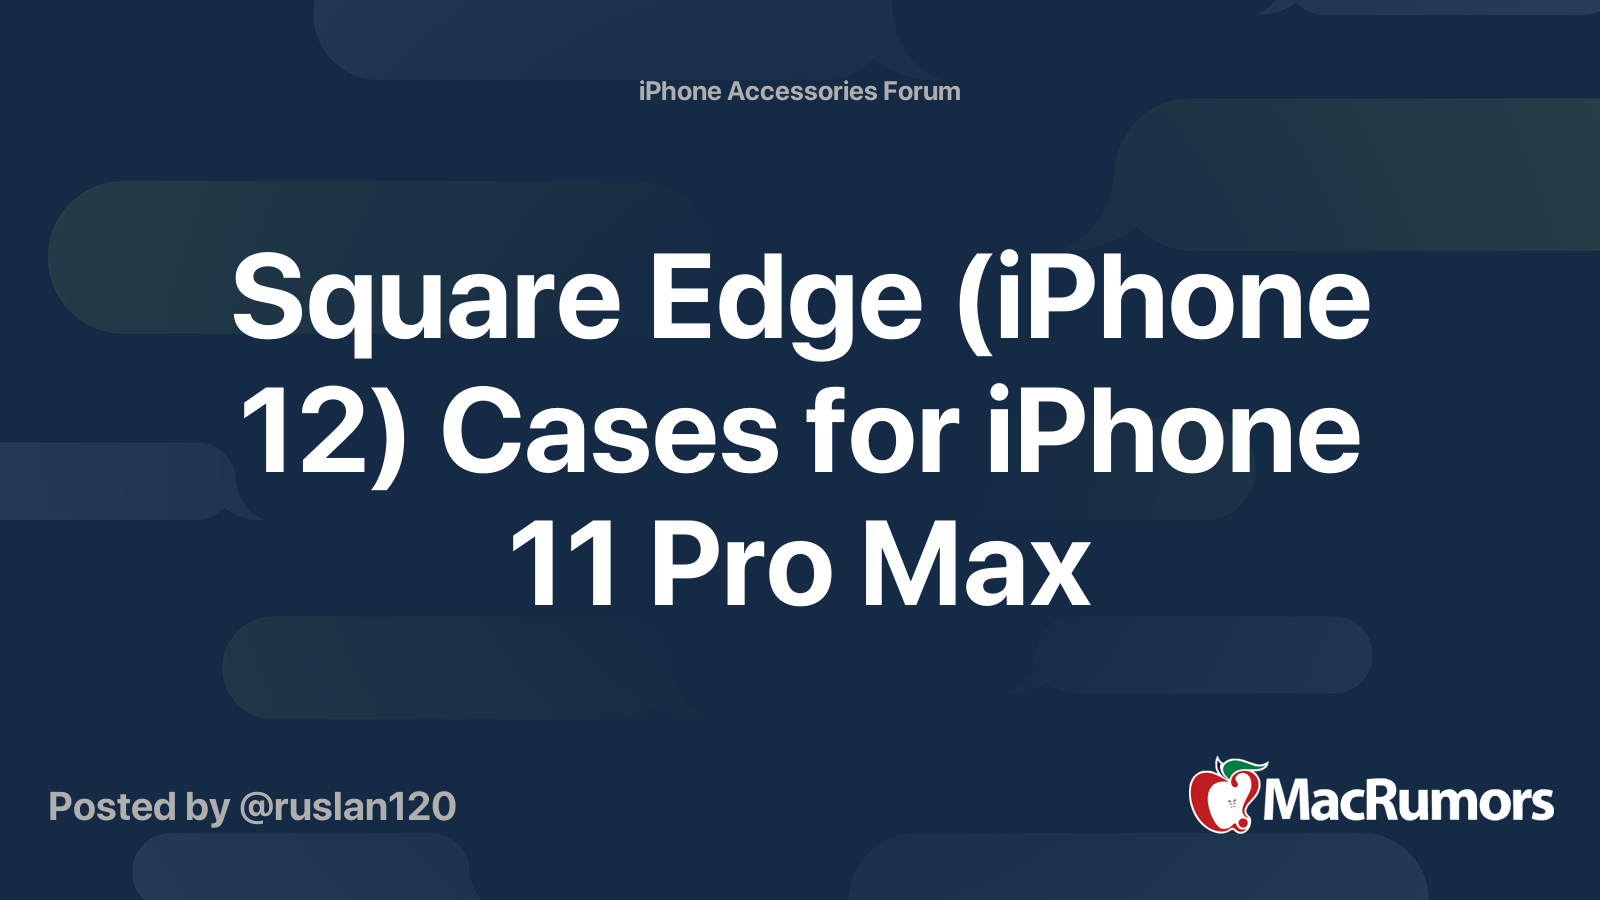 Now my iPhone 11 feels like 12 because of my new square edge case